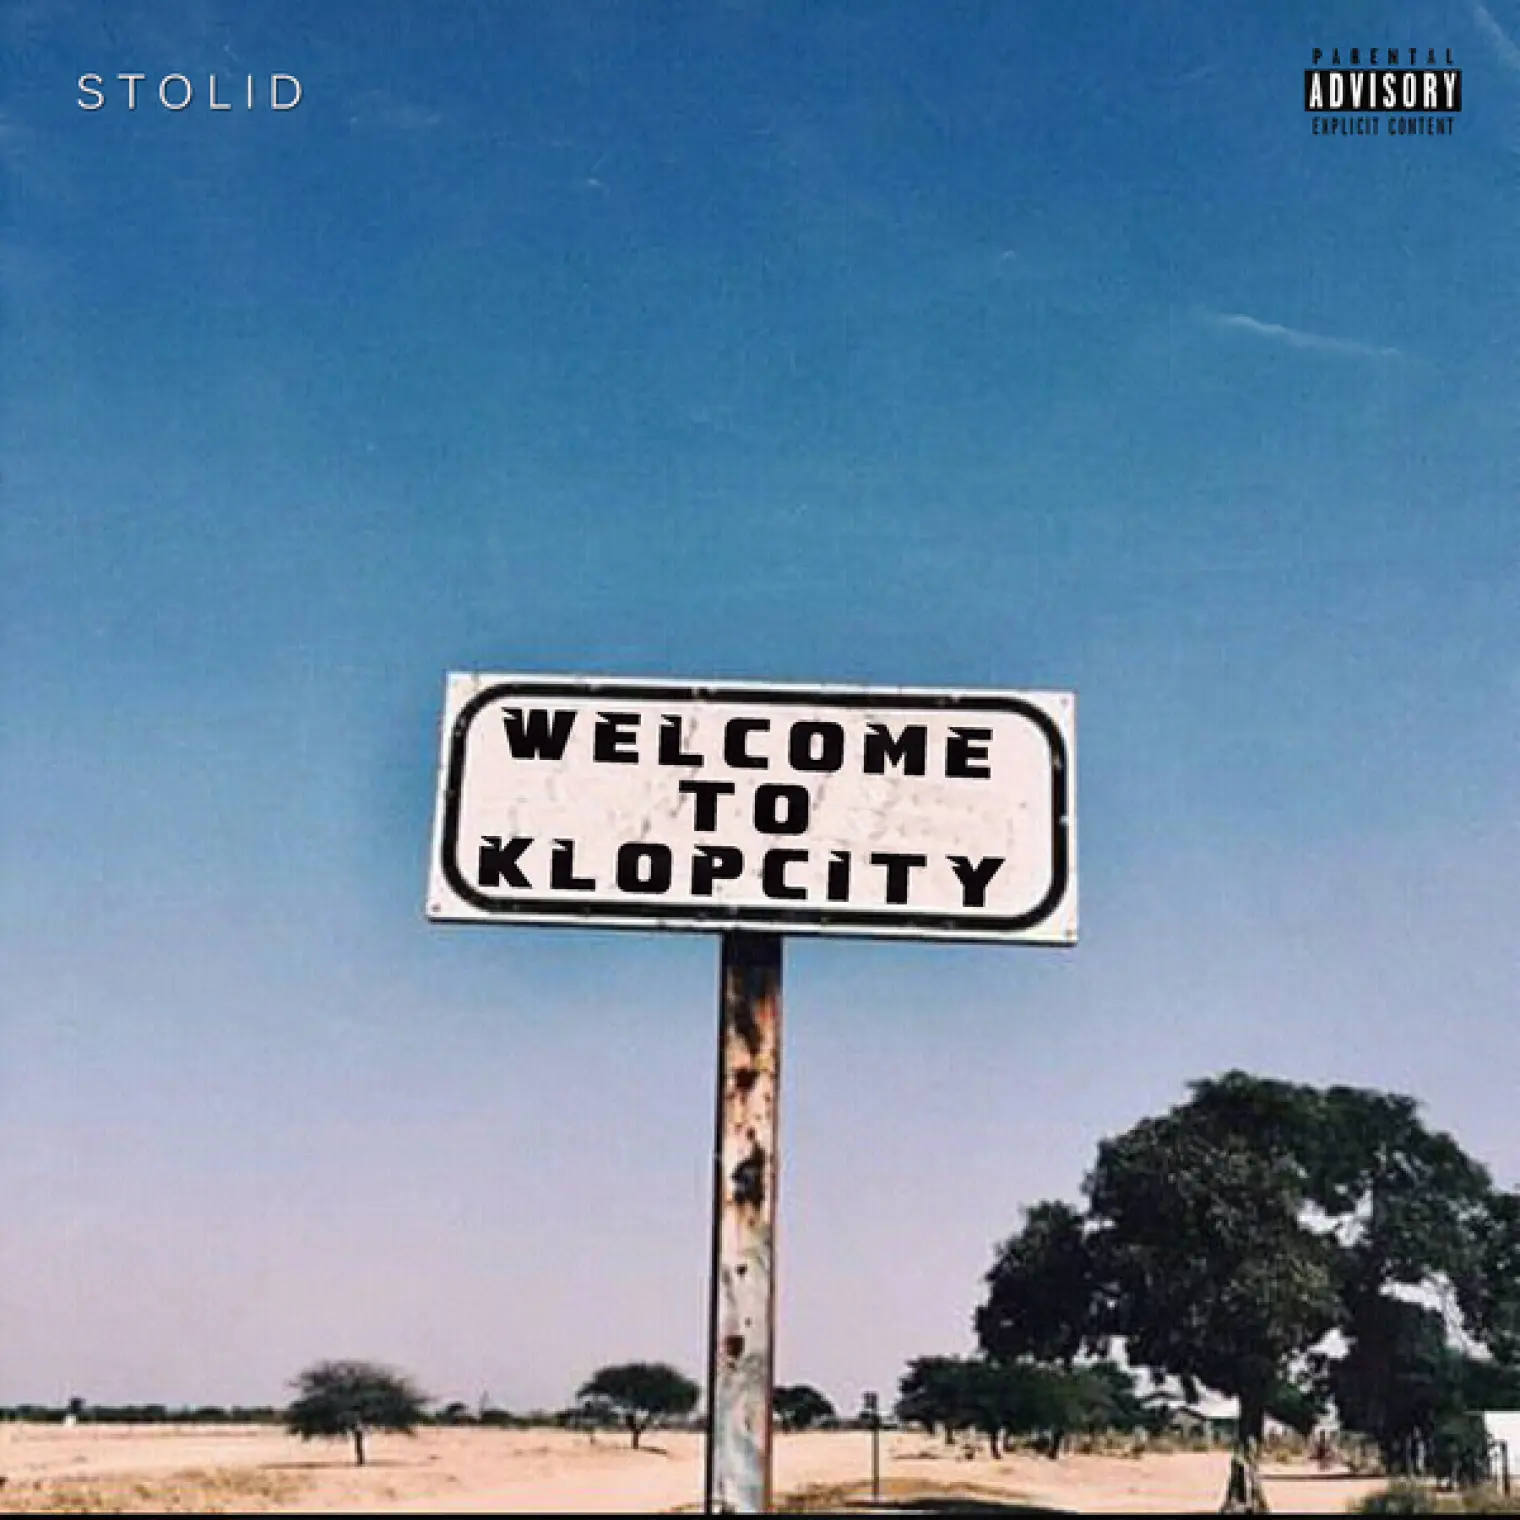 Welcome to Klopcity -  Stolid 